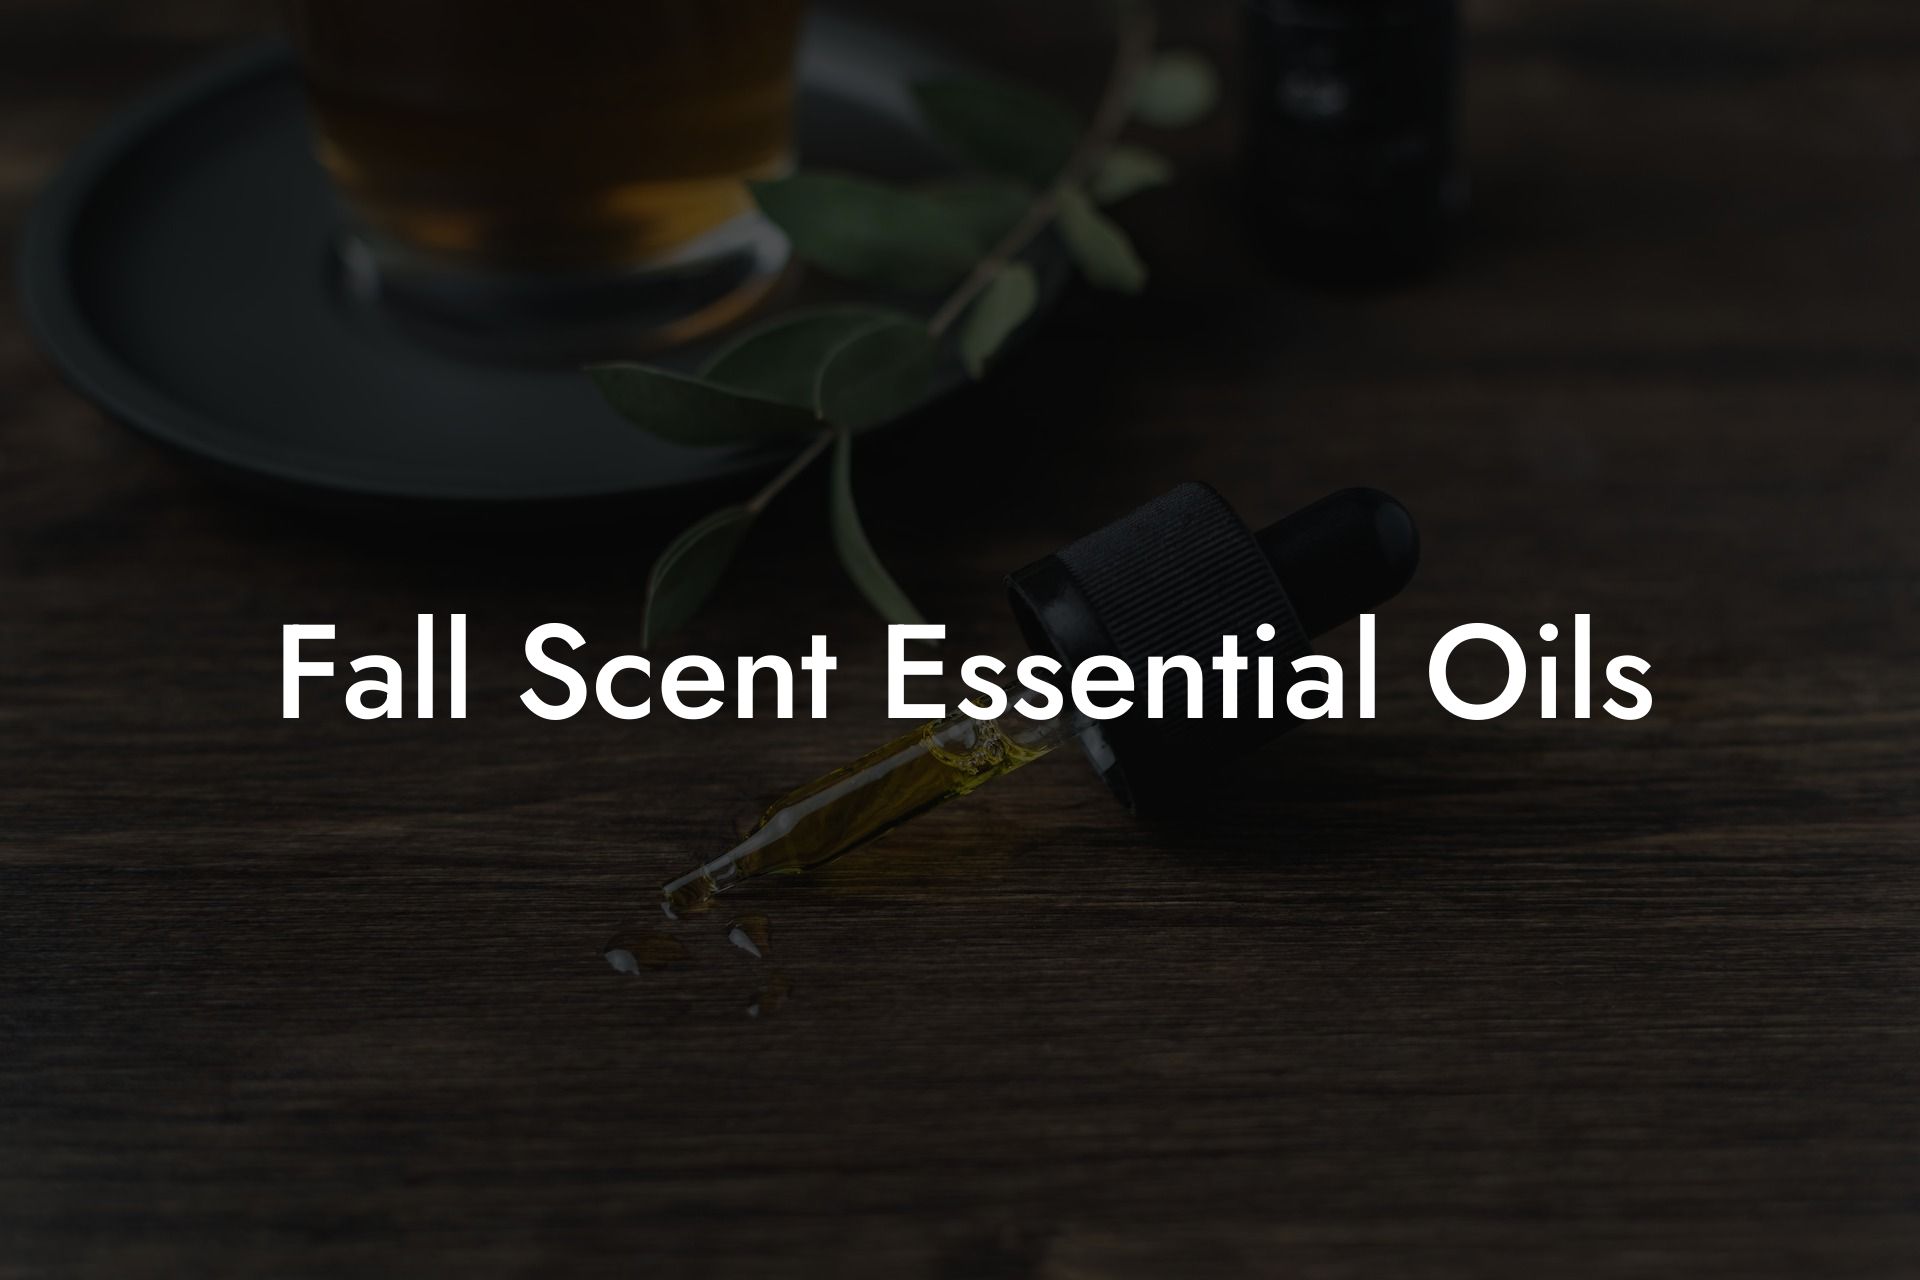 Fall Scent Essential Oils